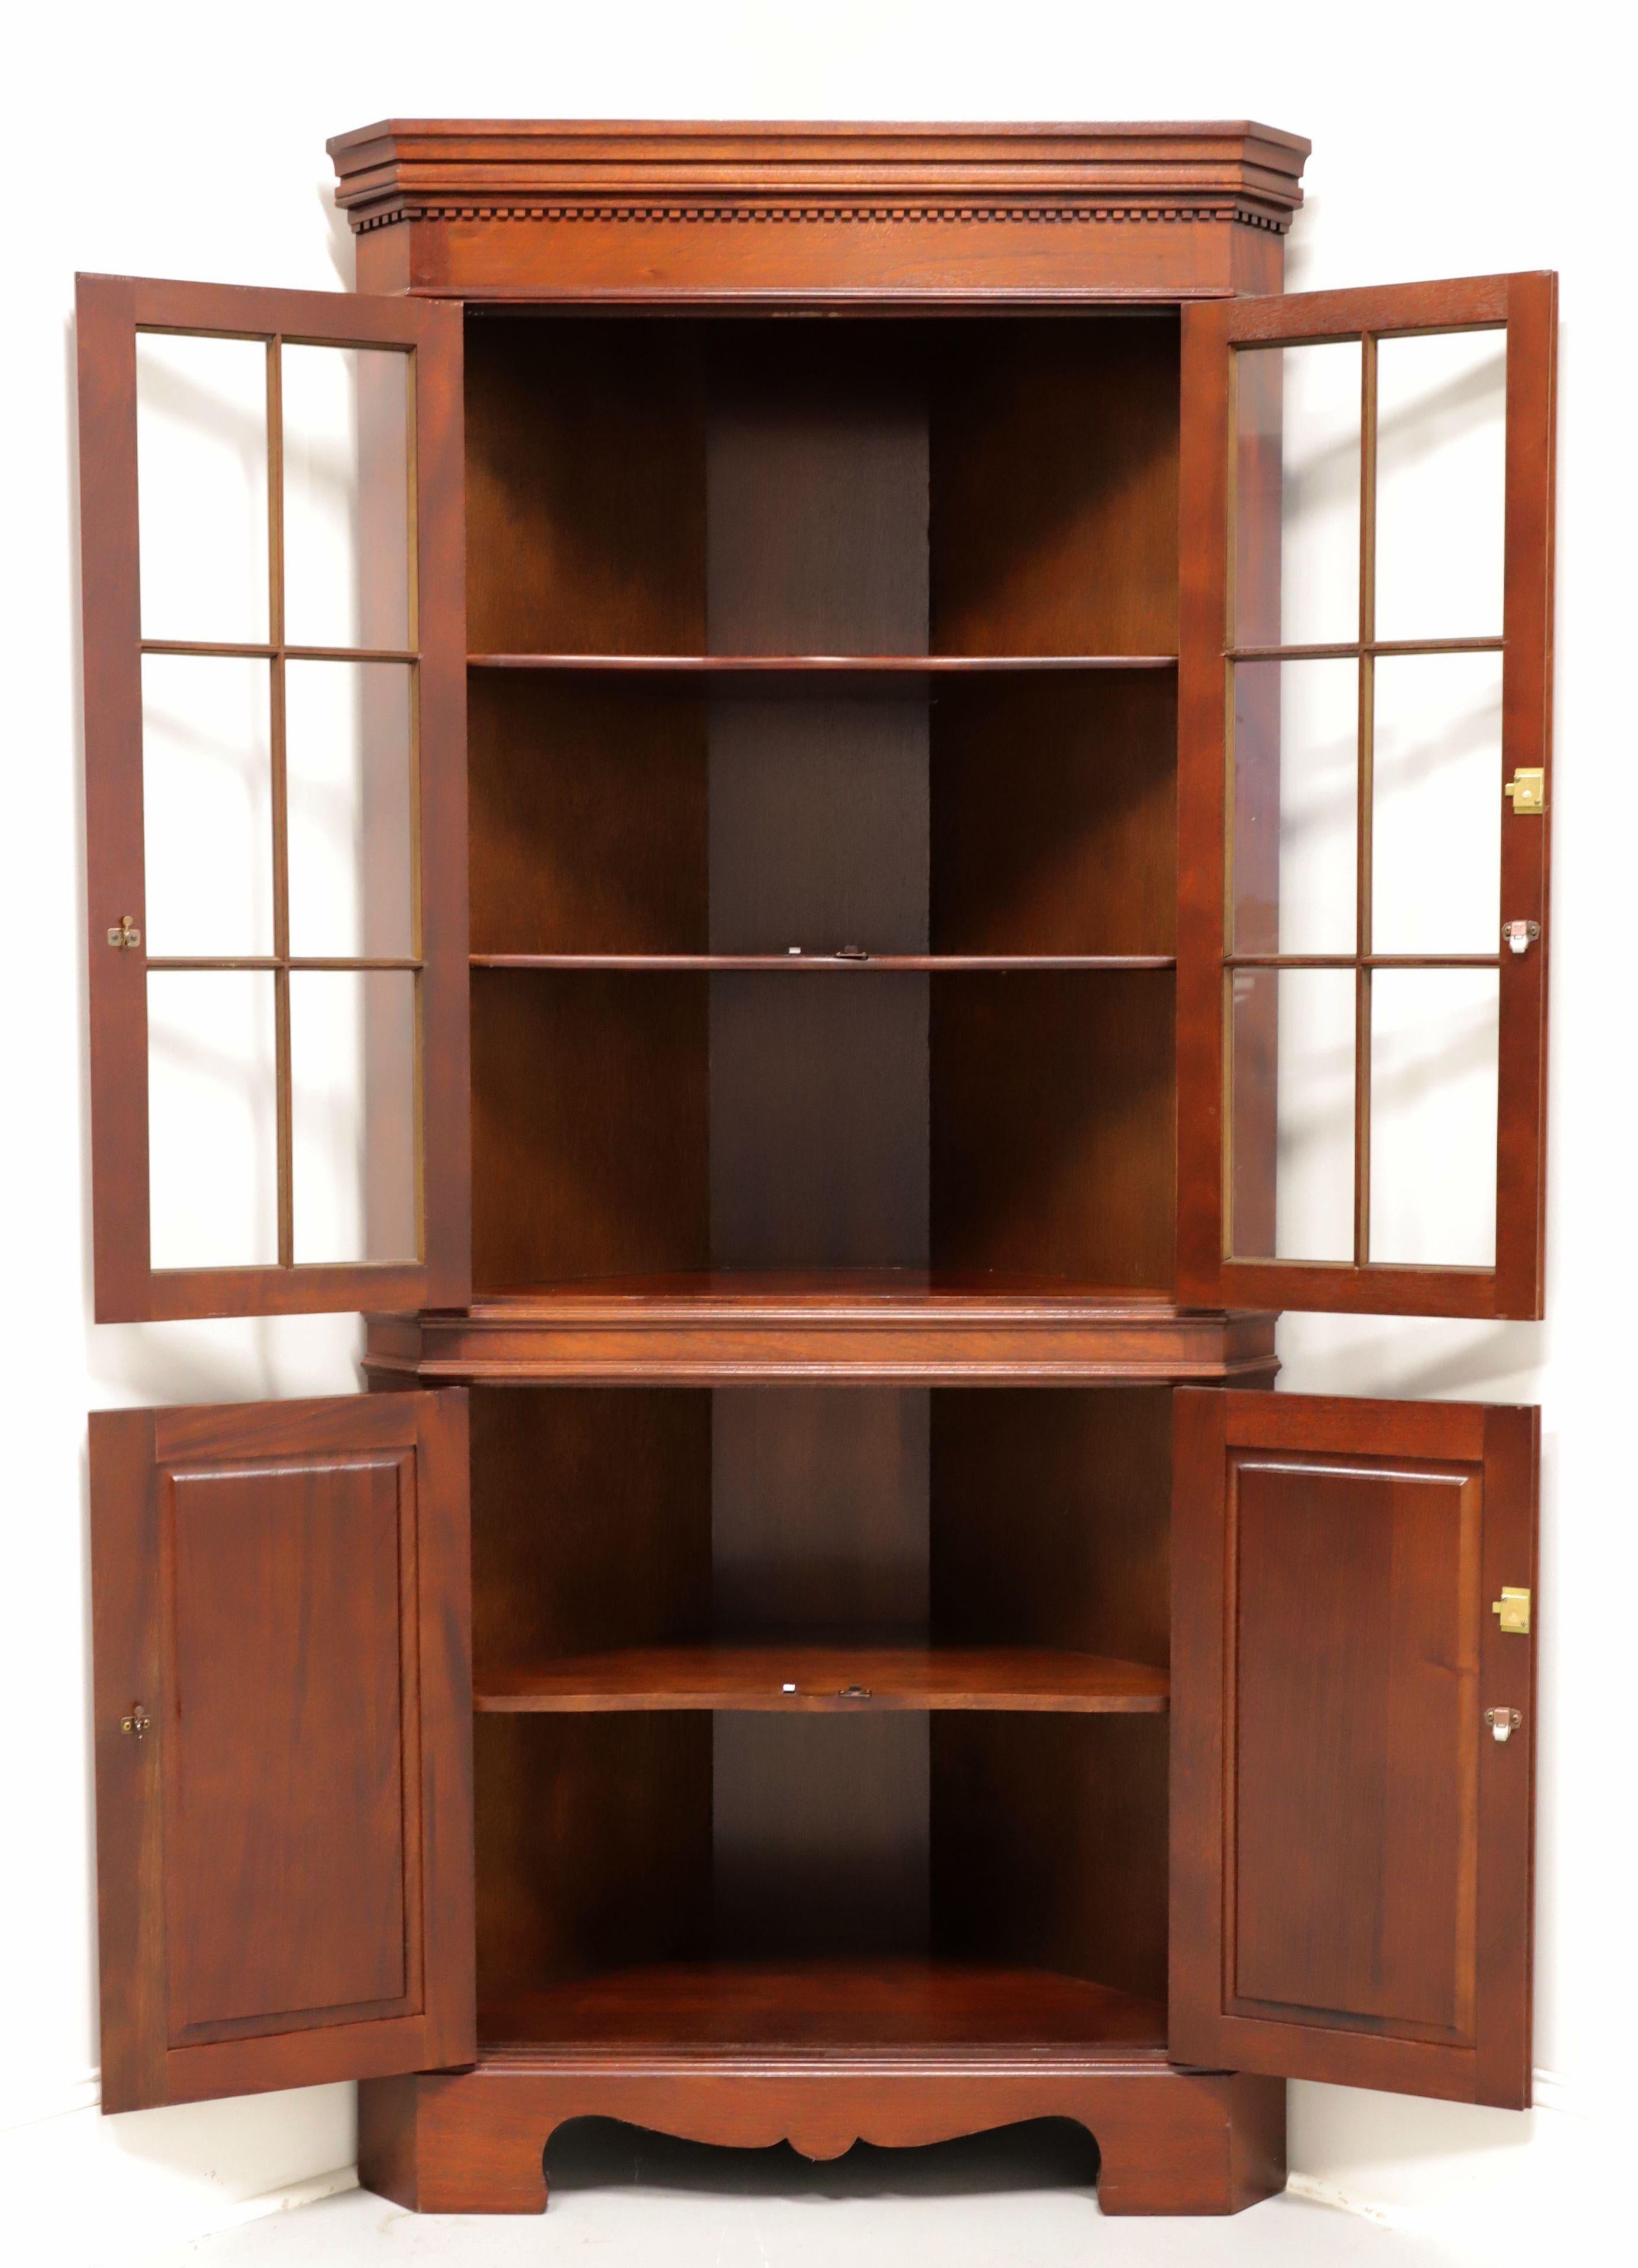 American CRAFTIQUE Solid Mahogany Chippendale Style Corner Cupboard / Cabinet - D For Sale